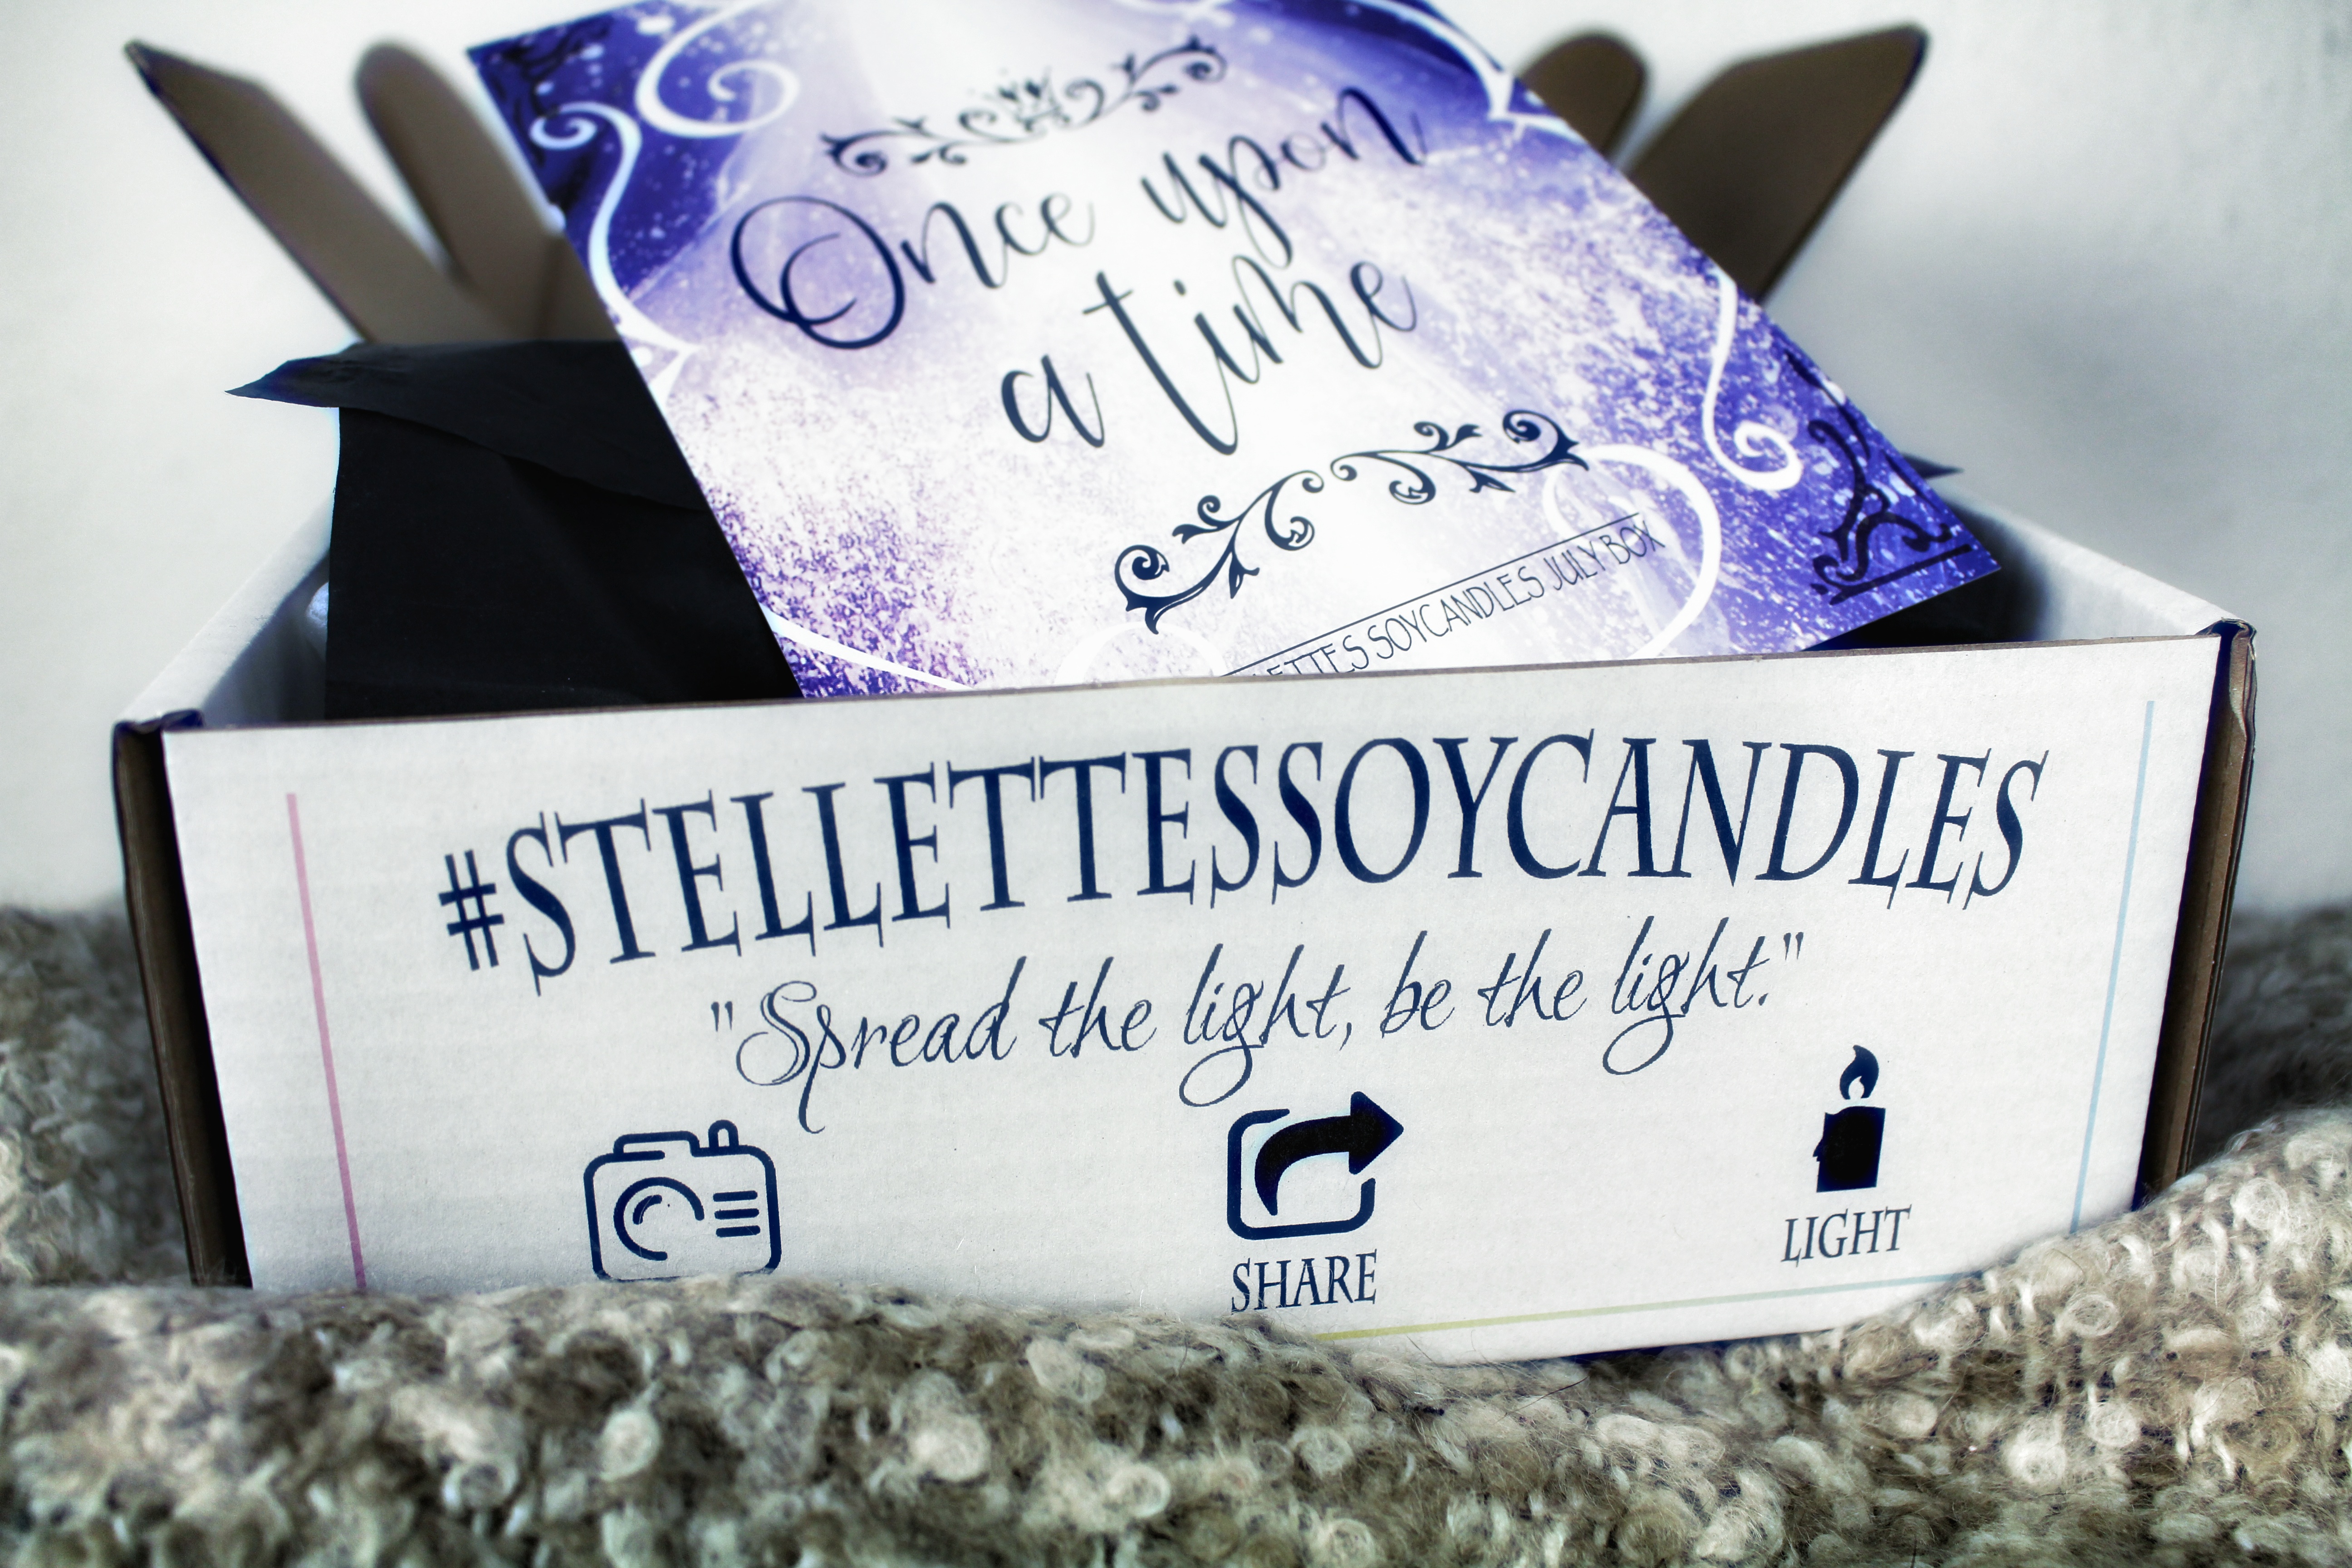 Unpacking: [Stelletes Soycandles] Candlebox – Once upon a time